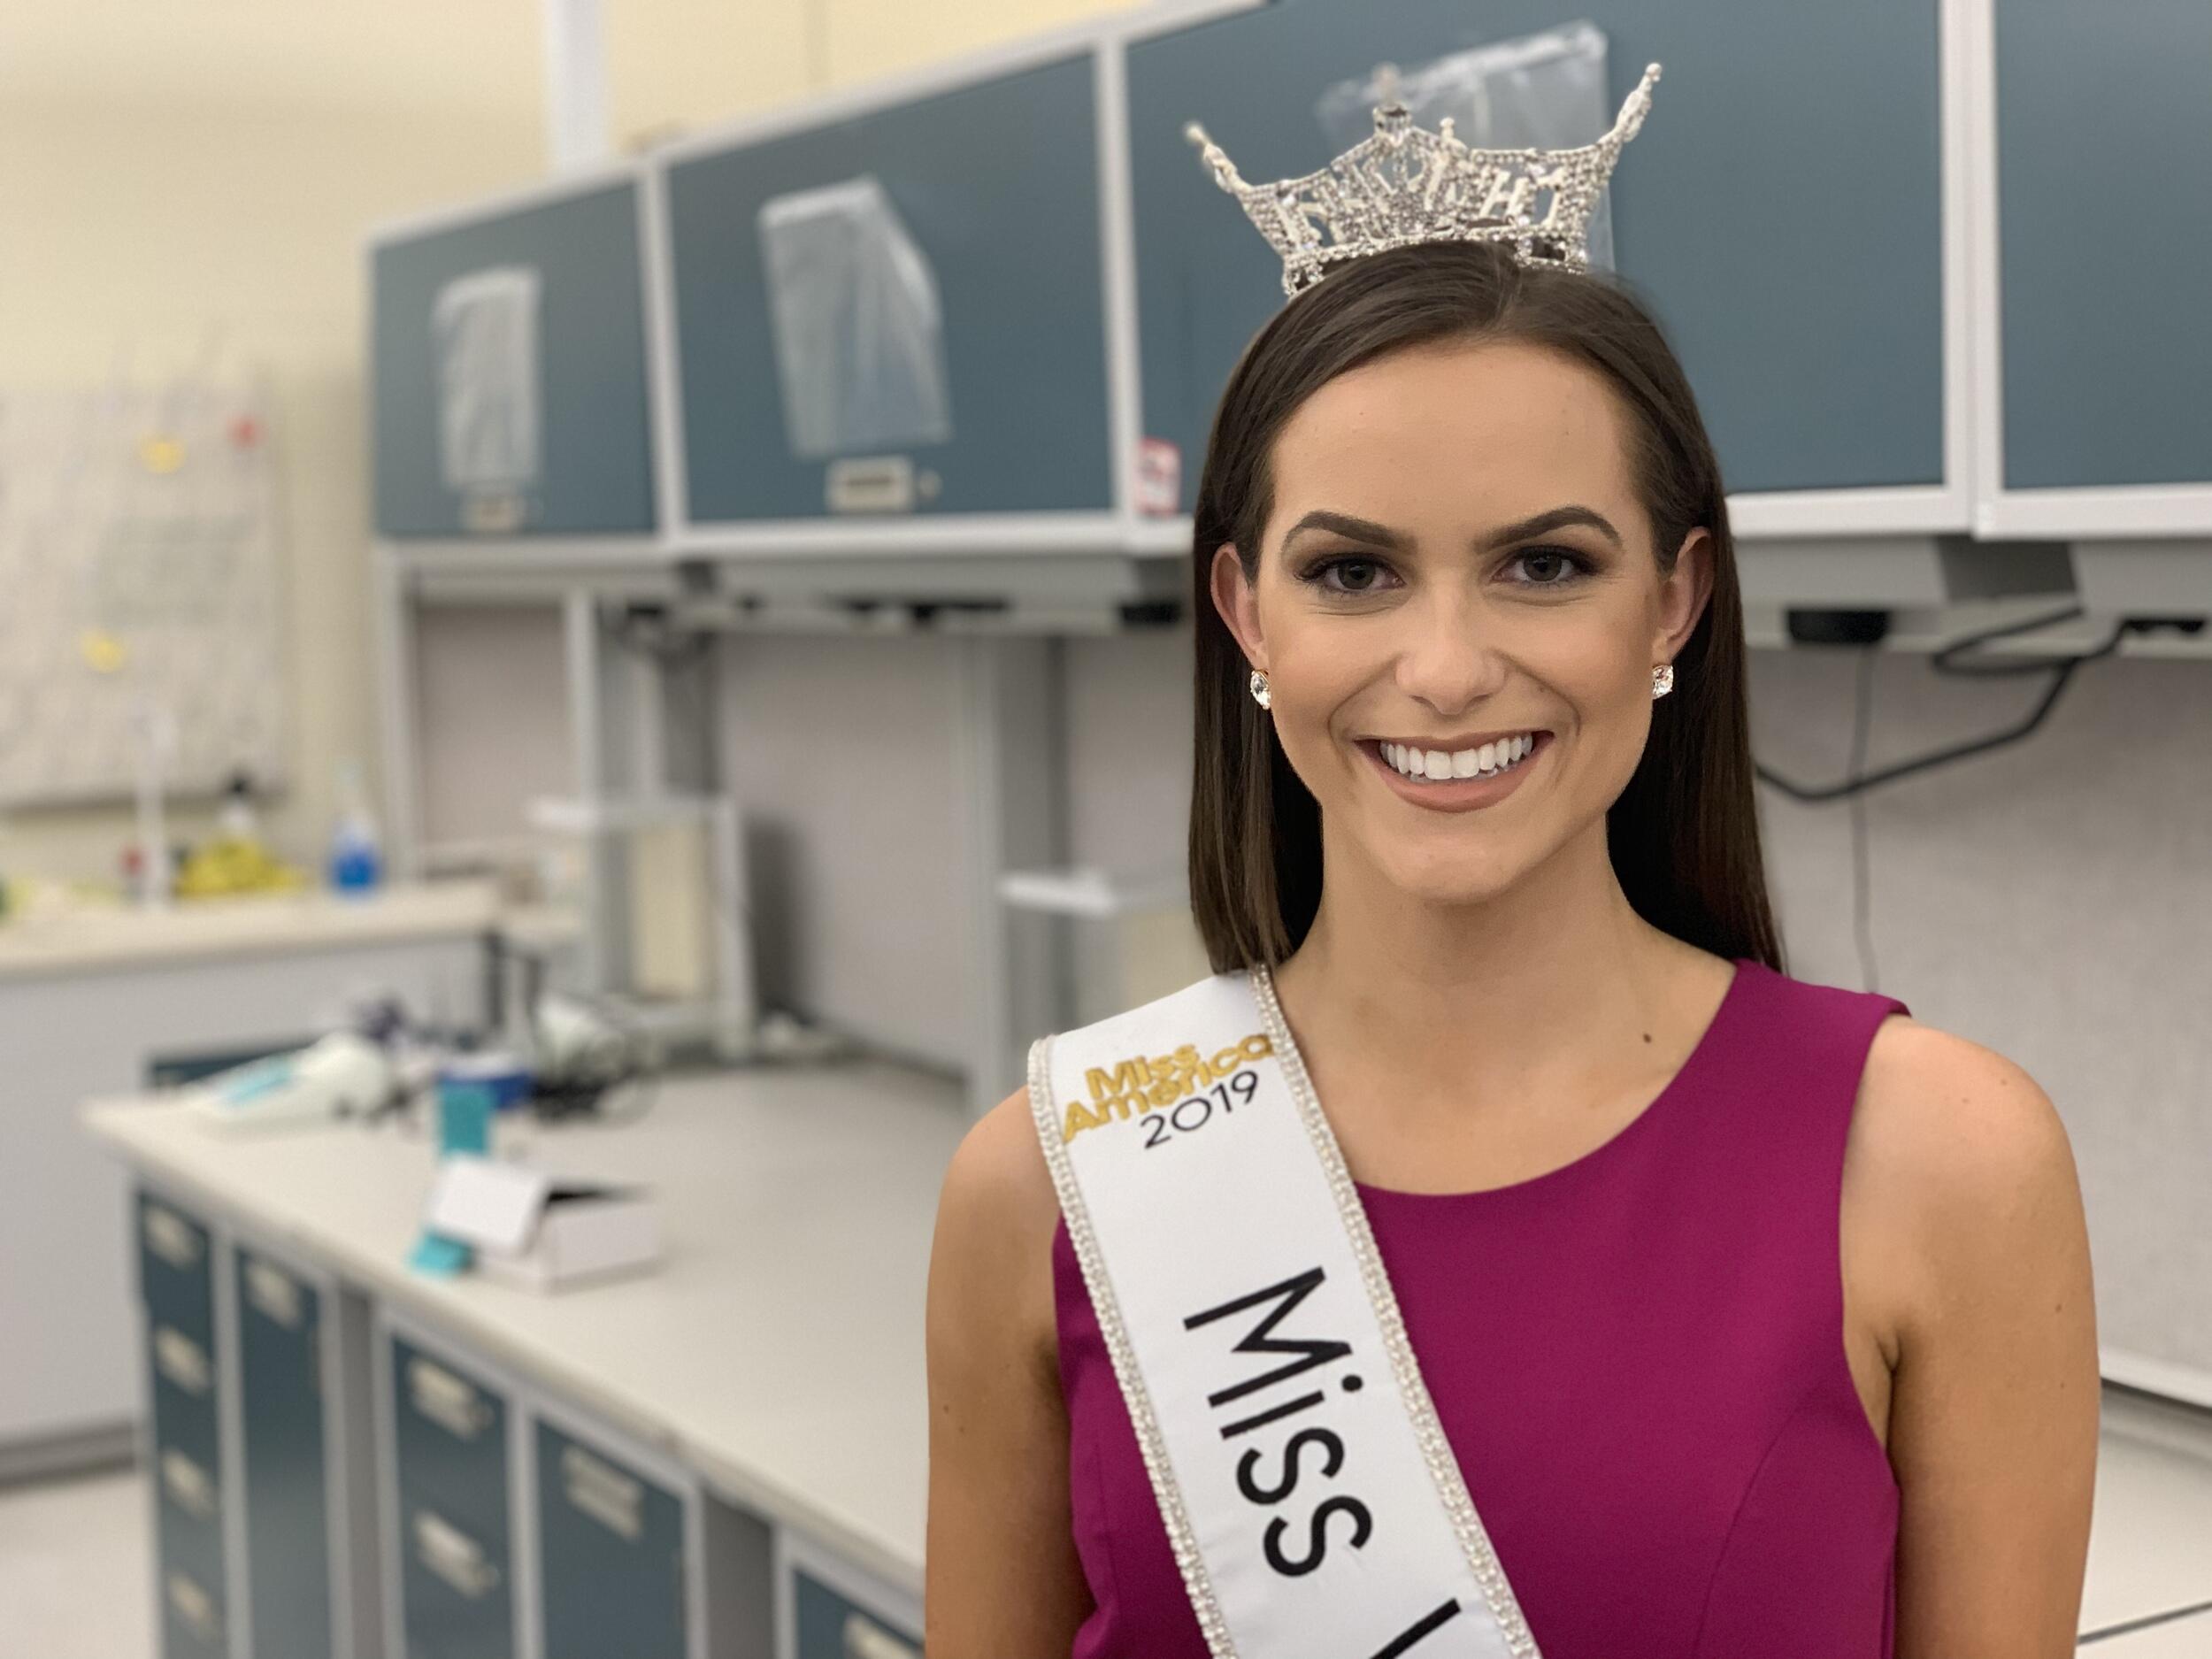 Camille Schrier poses for a portrait inside of a laboratory. She is wearing a Miss Virginia sash and a crown.